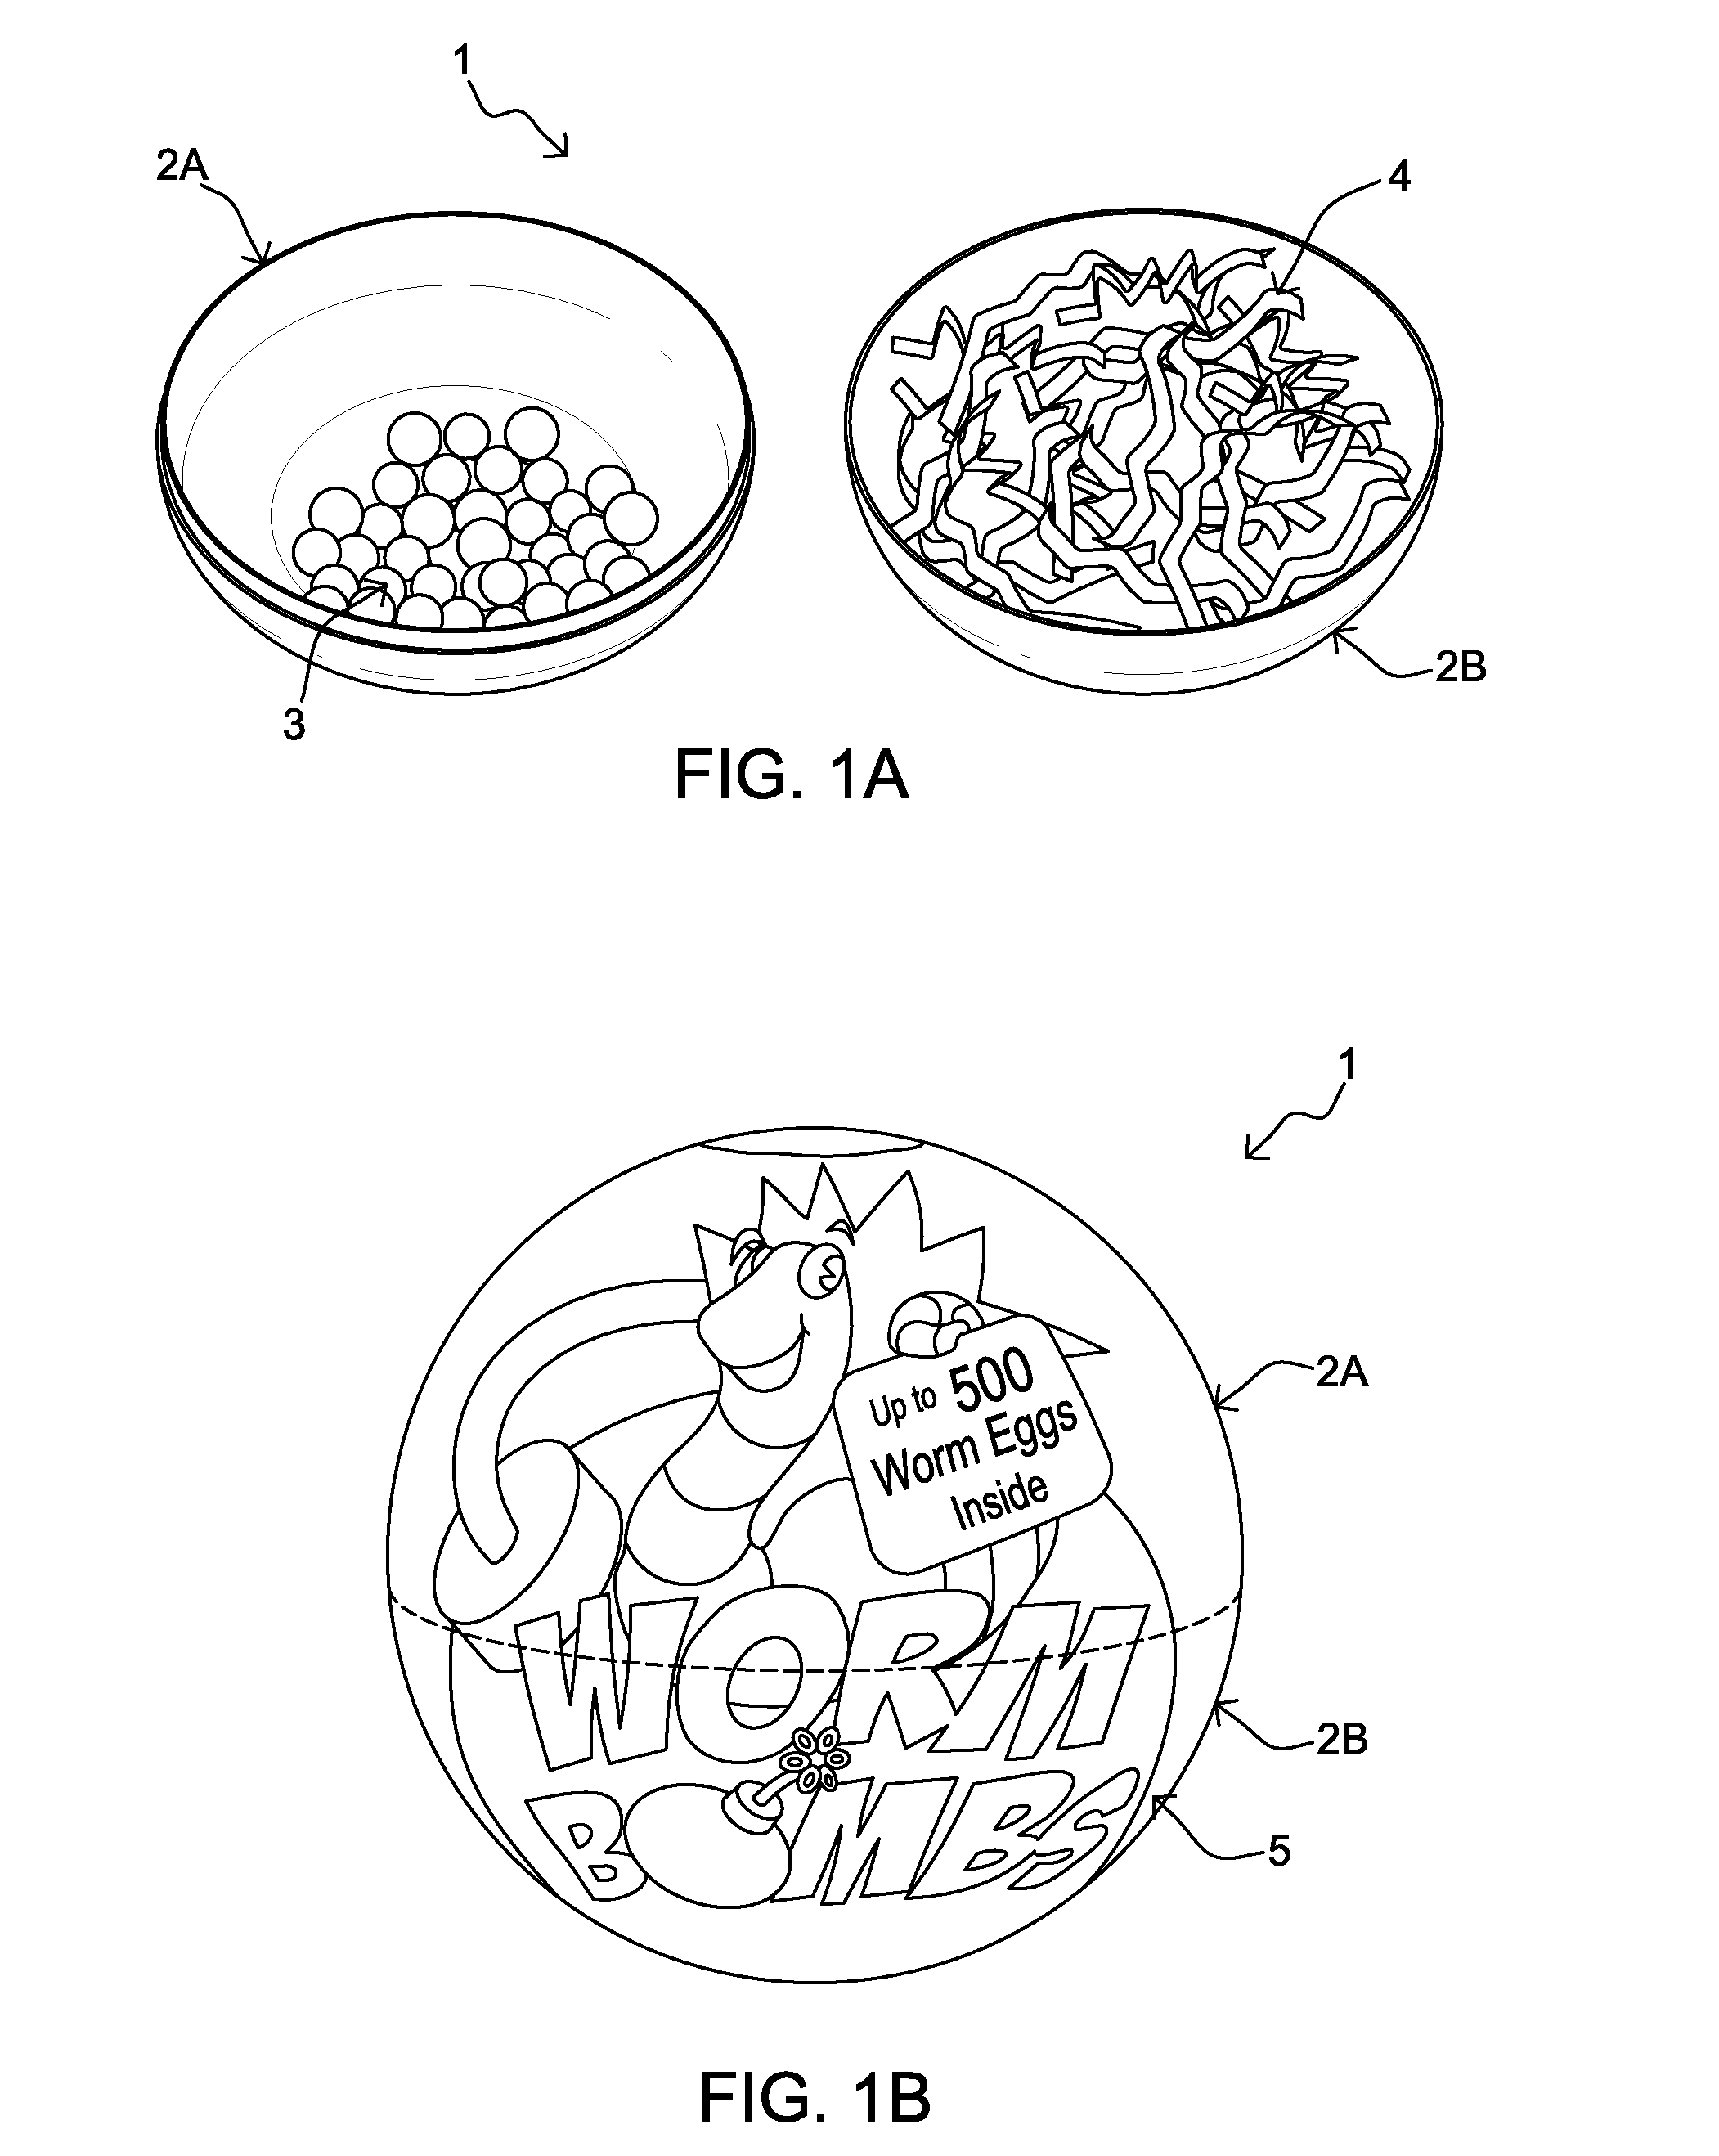 Biodegradable worm-egg-delivery system for soil enhancement and methods of use